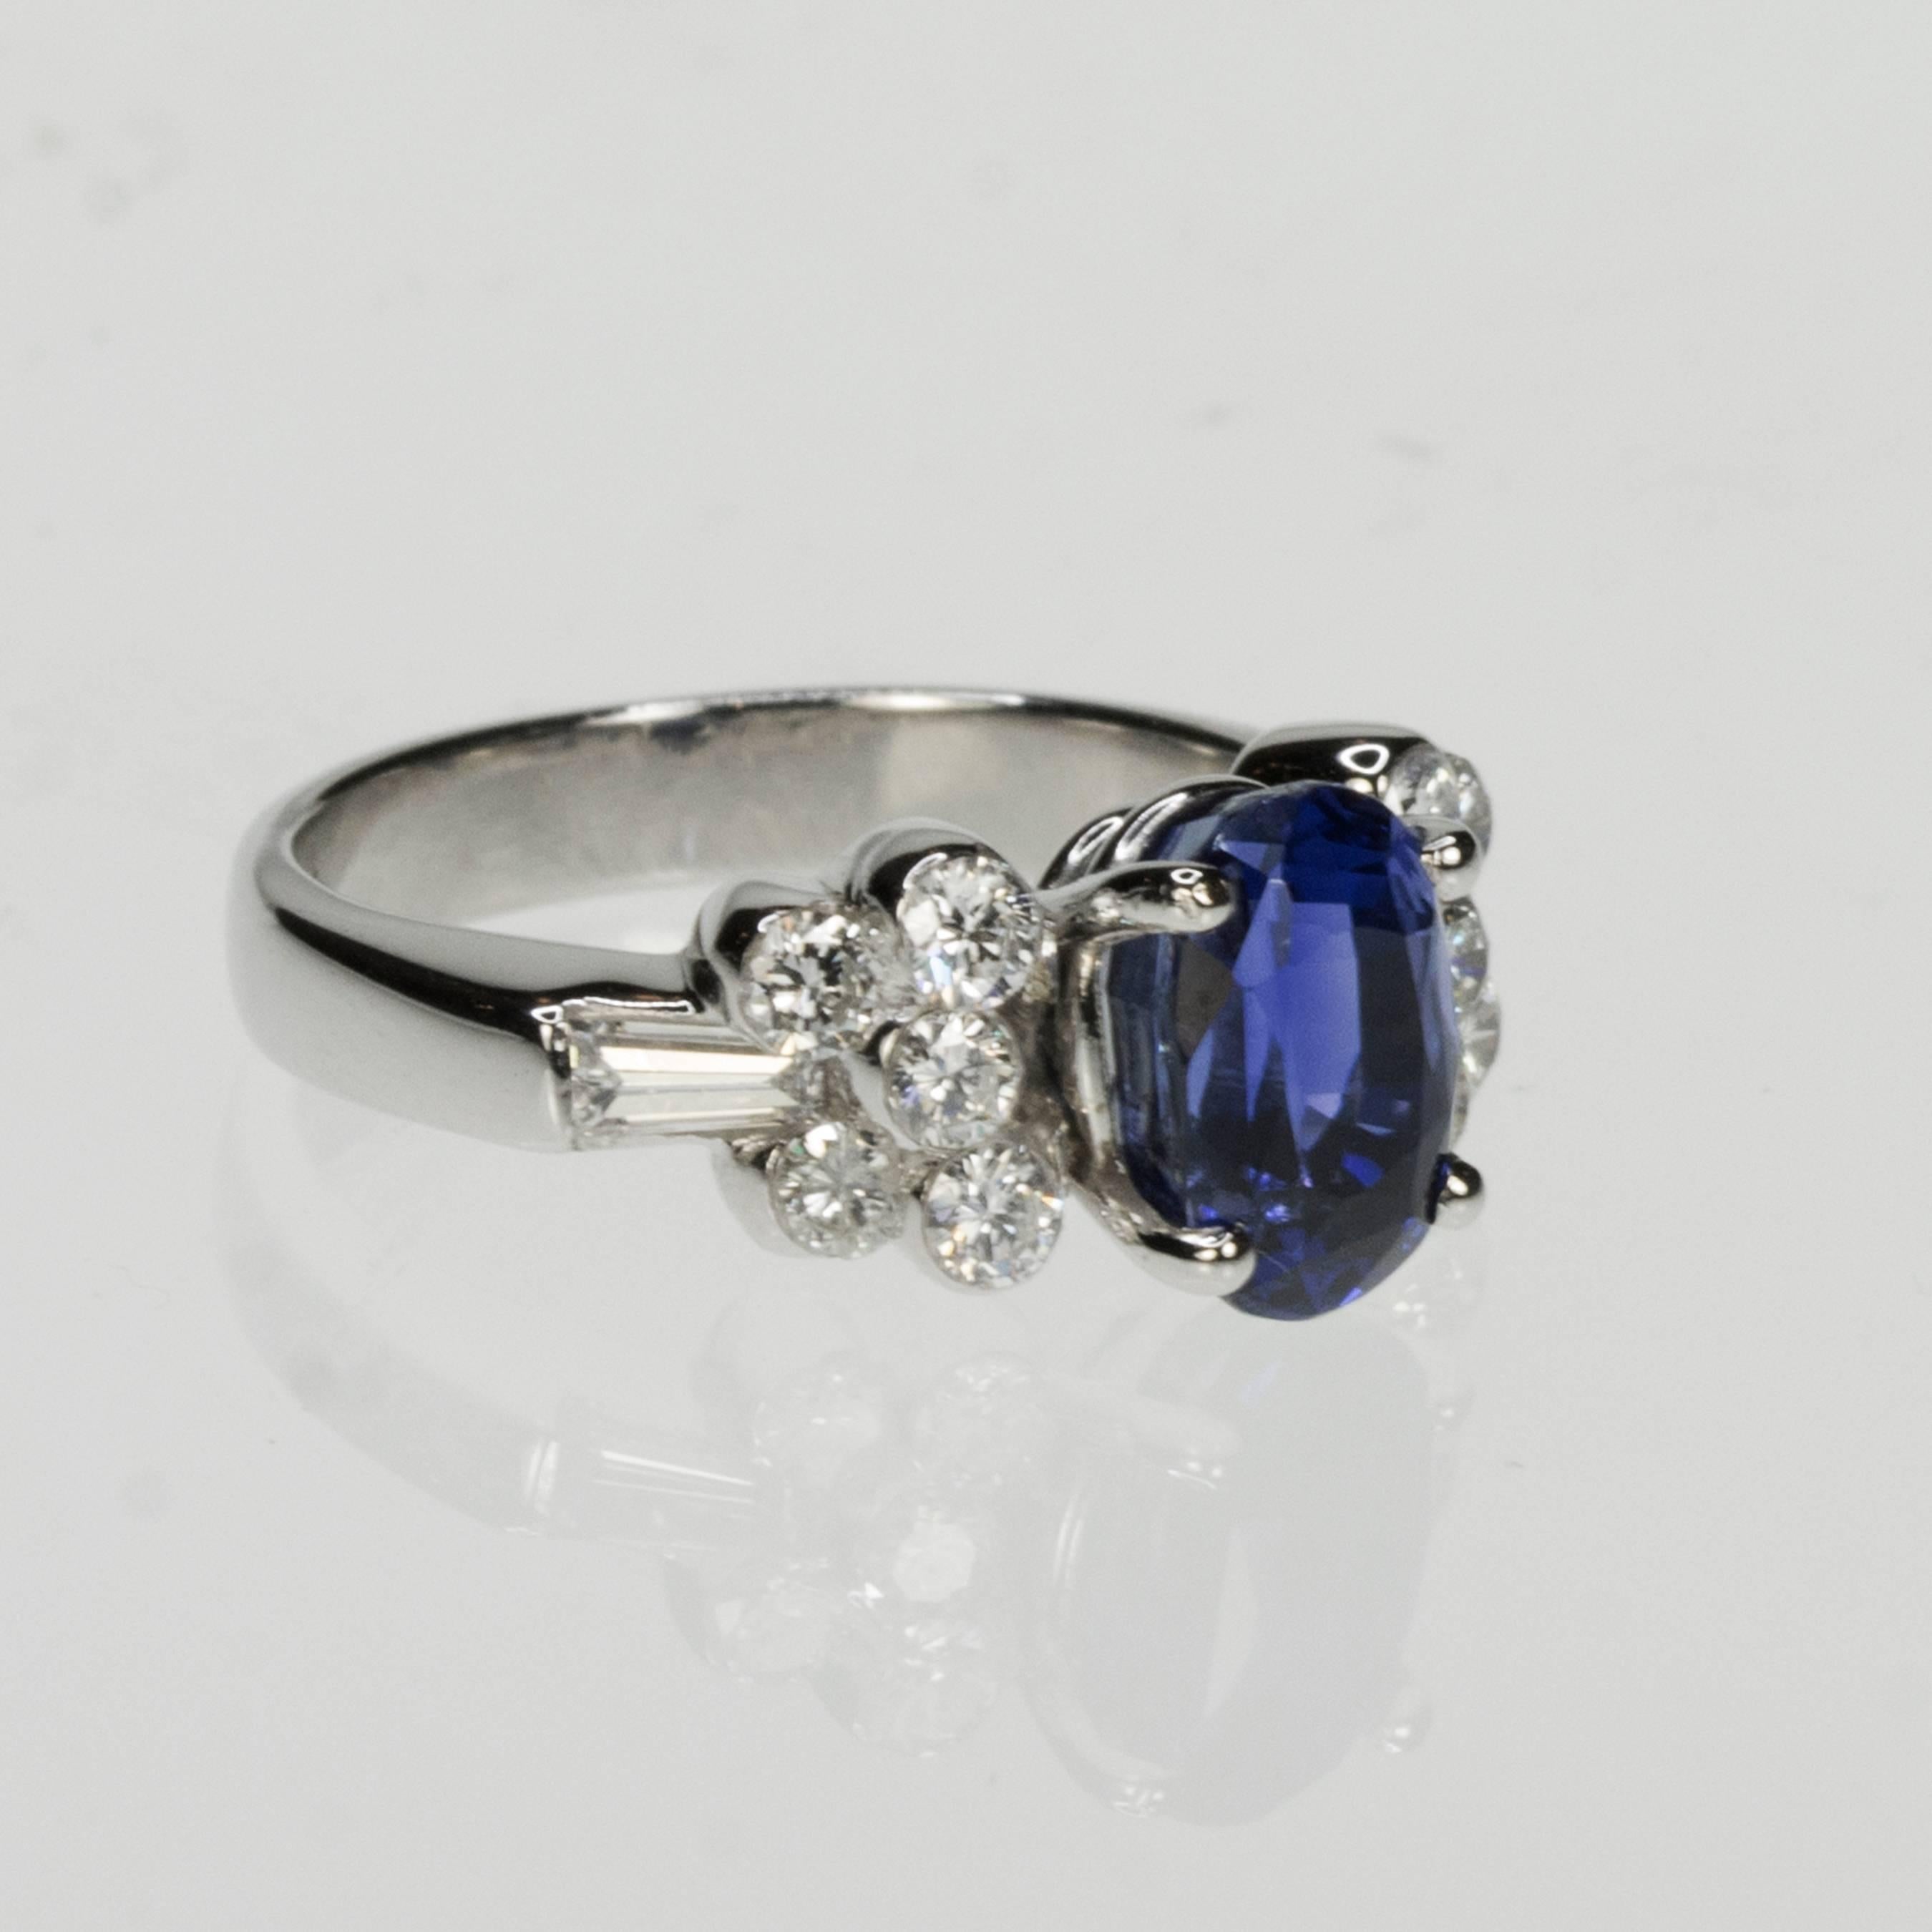 18k Ring with 1 AGL certified Ceylon Sapphire weighing 3.47 carats and round brilliant and staight baguette diamonds weighing 0.85 carats.